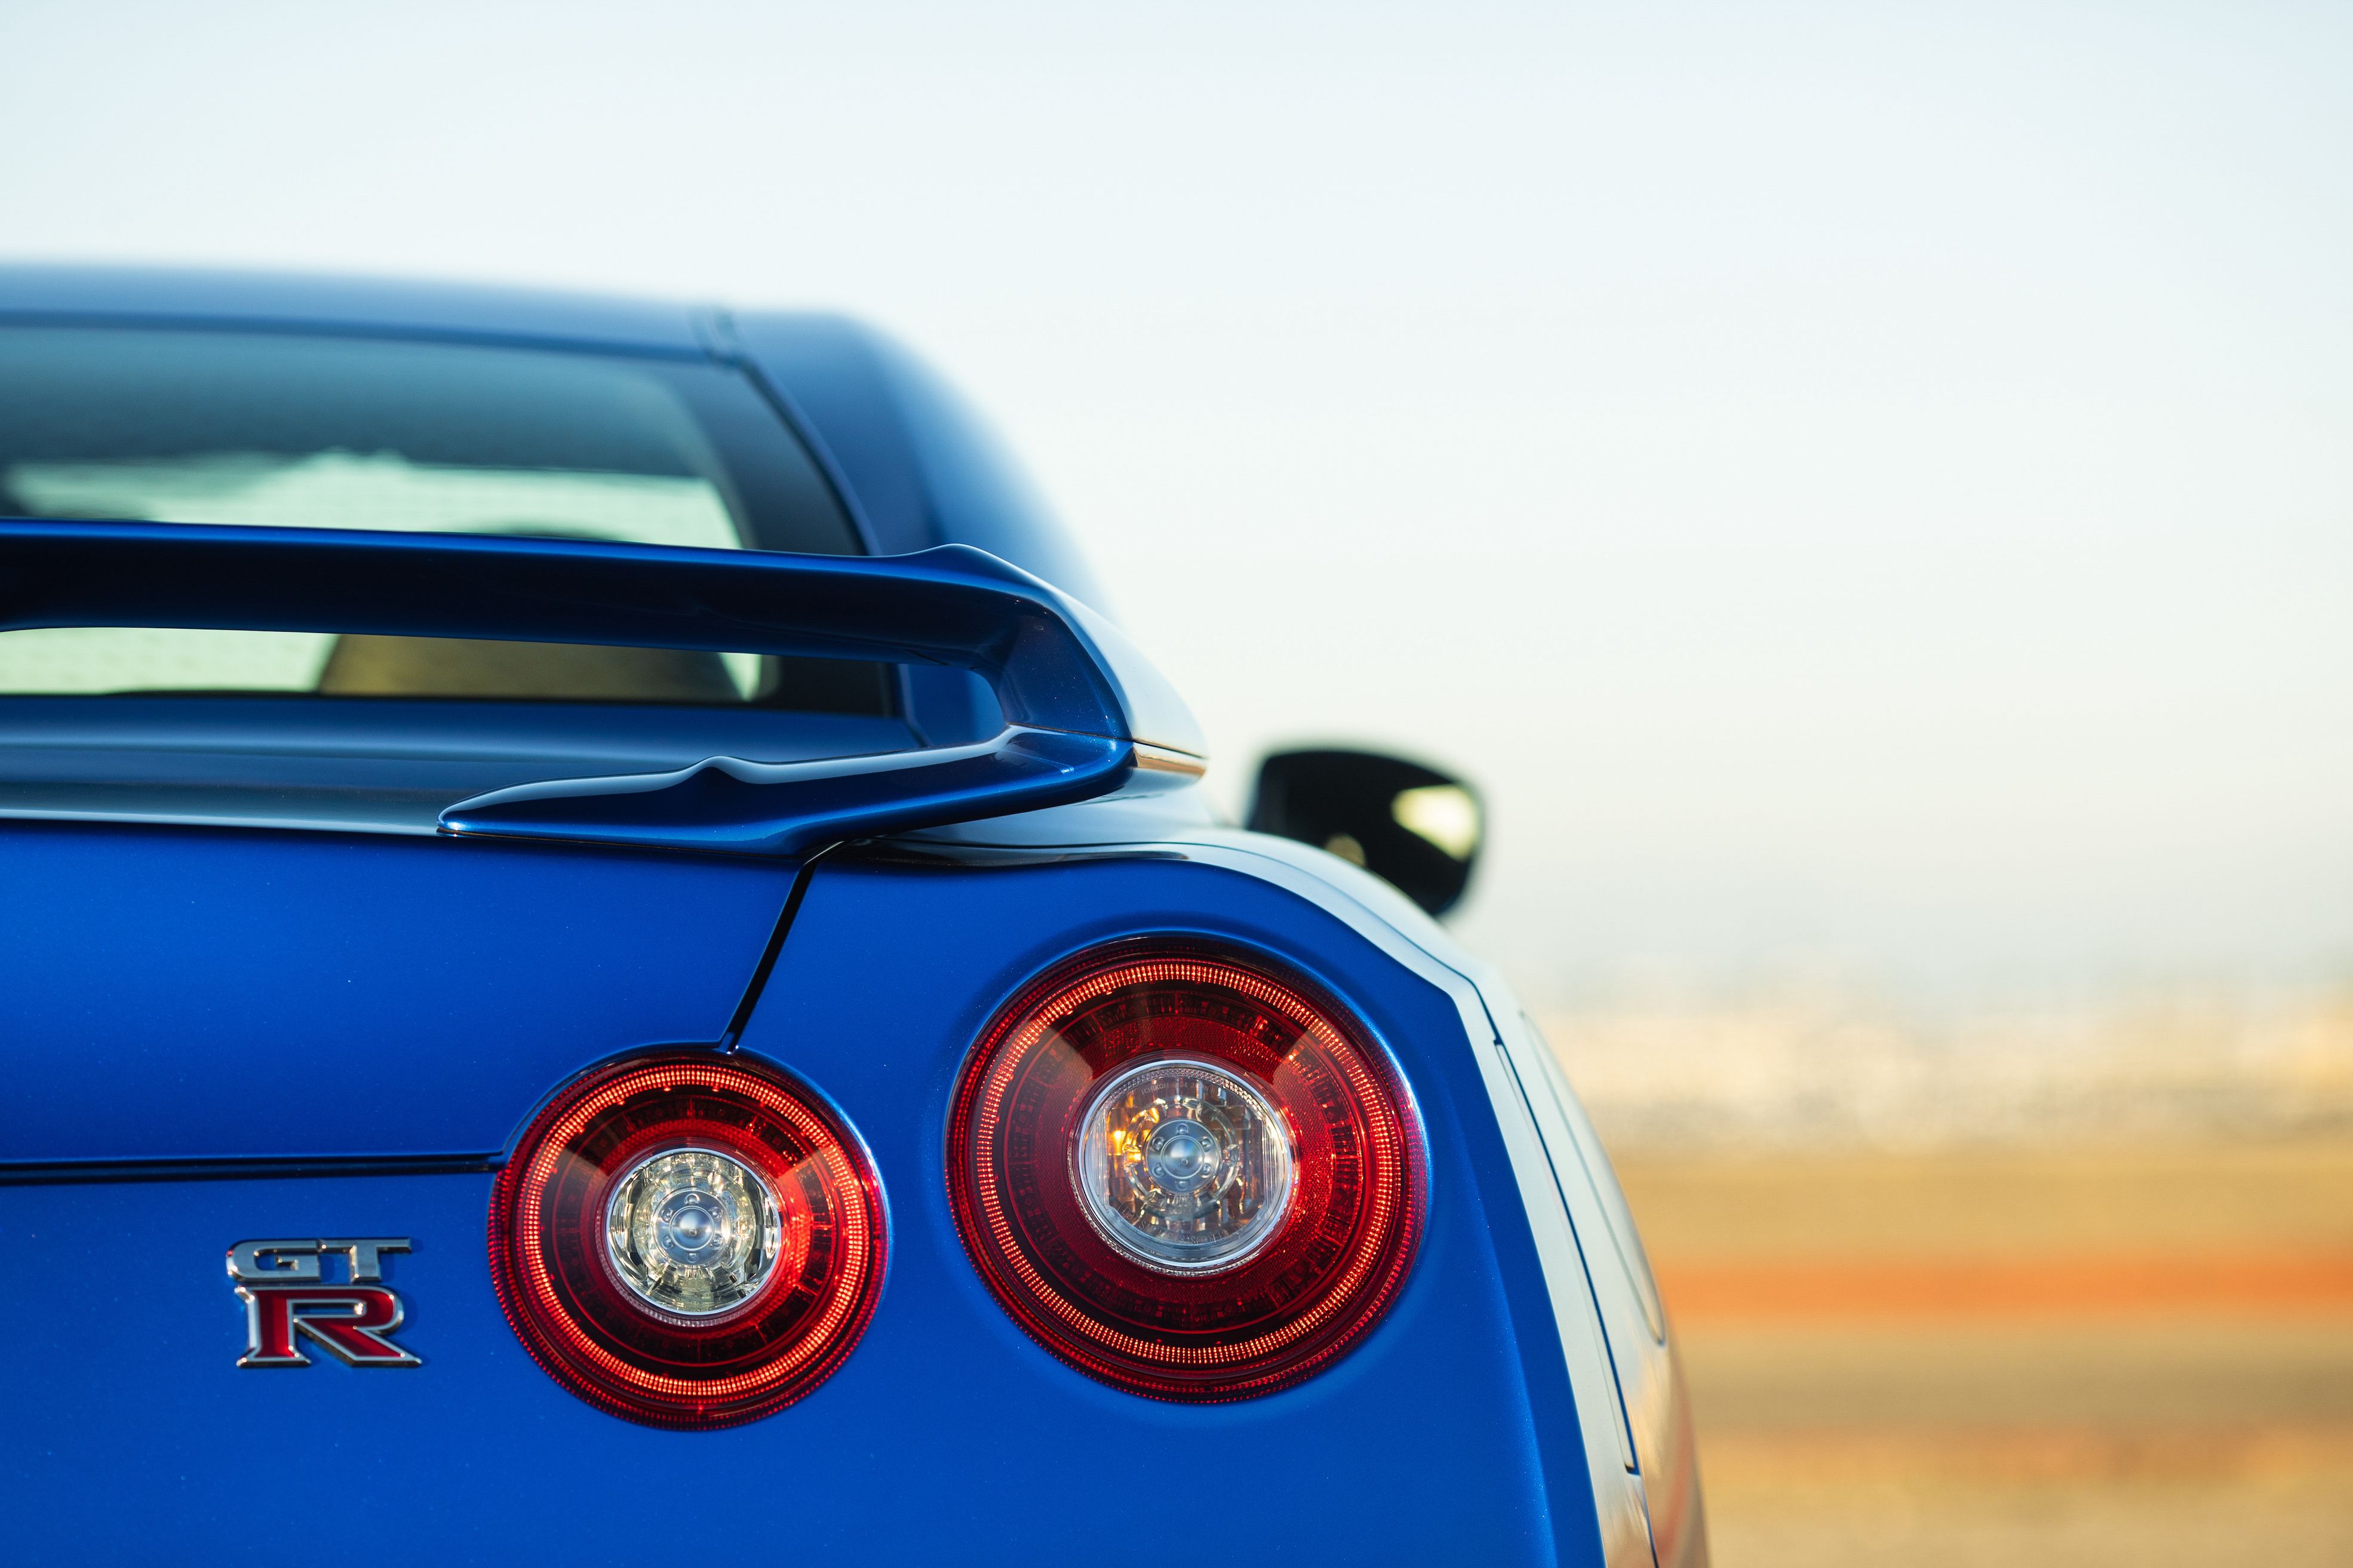 Nissan R36 GT-R: what we know about it